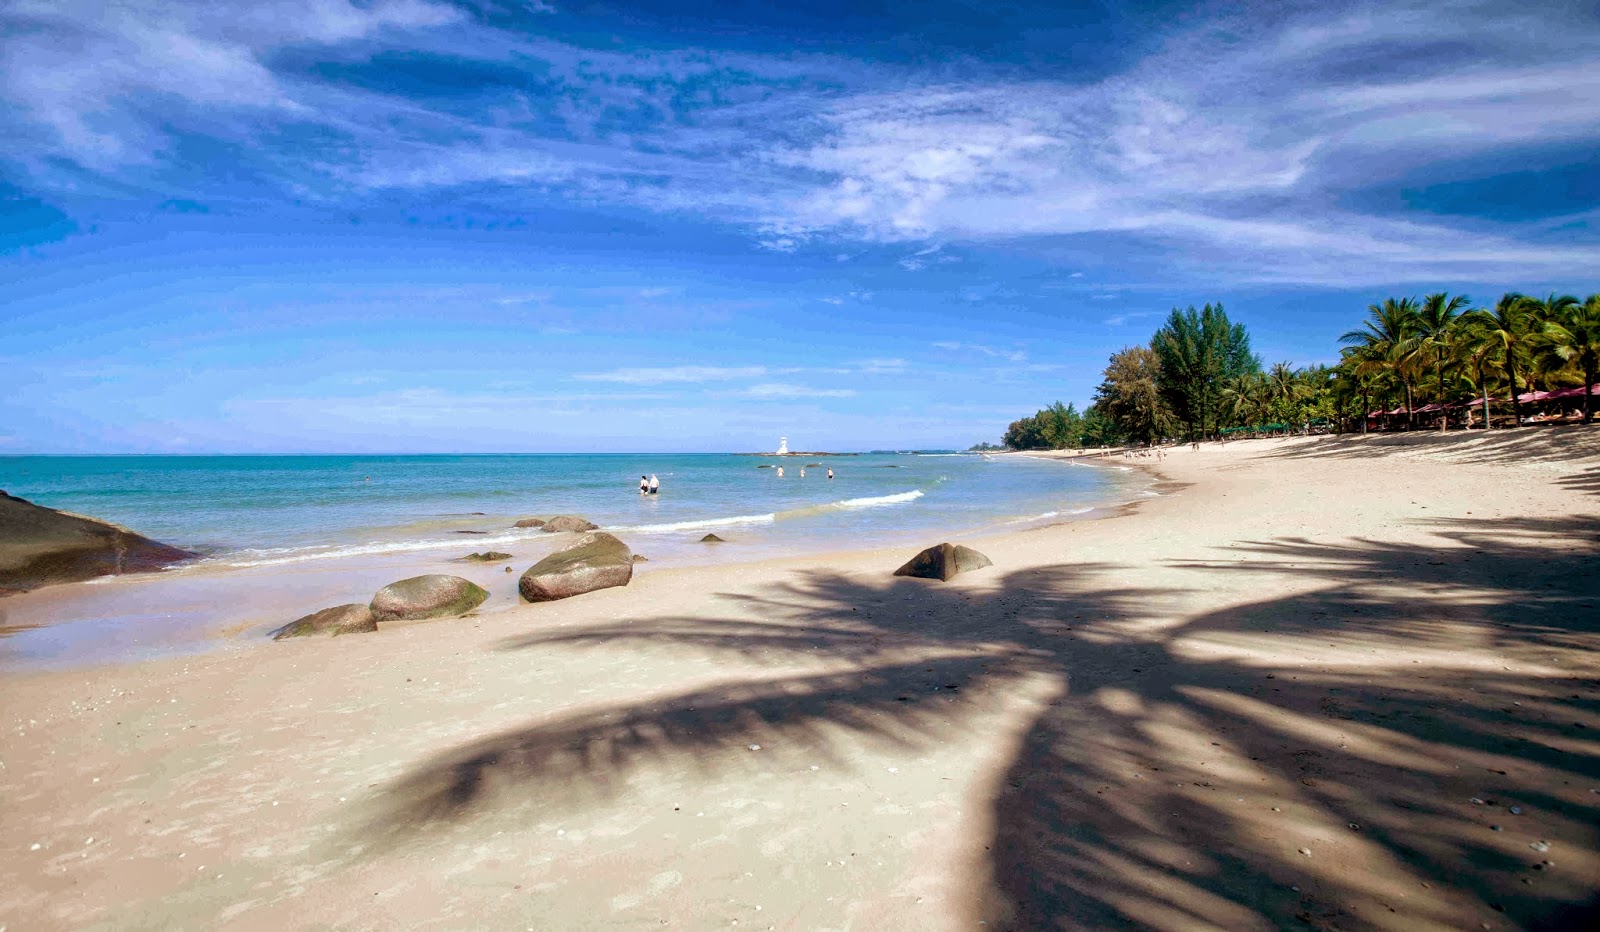 Kao Jai Thailand: Not Much Lacking in Khao Lak